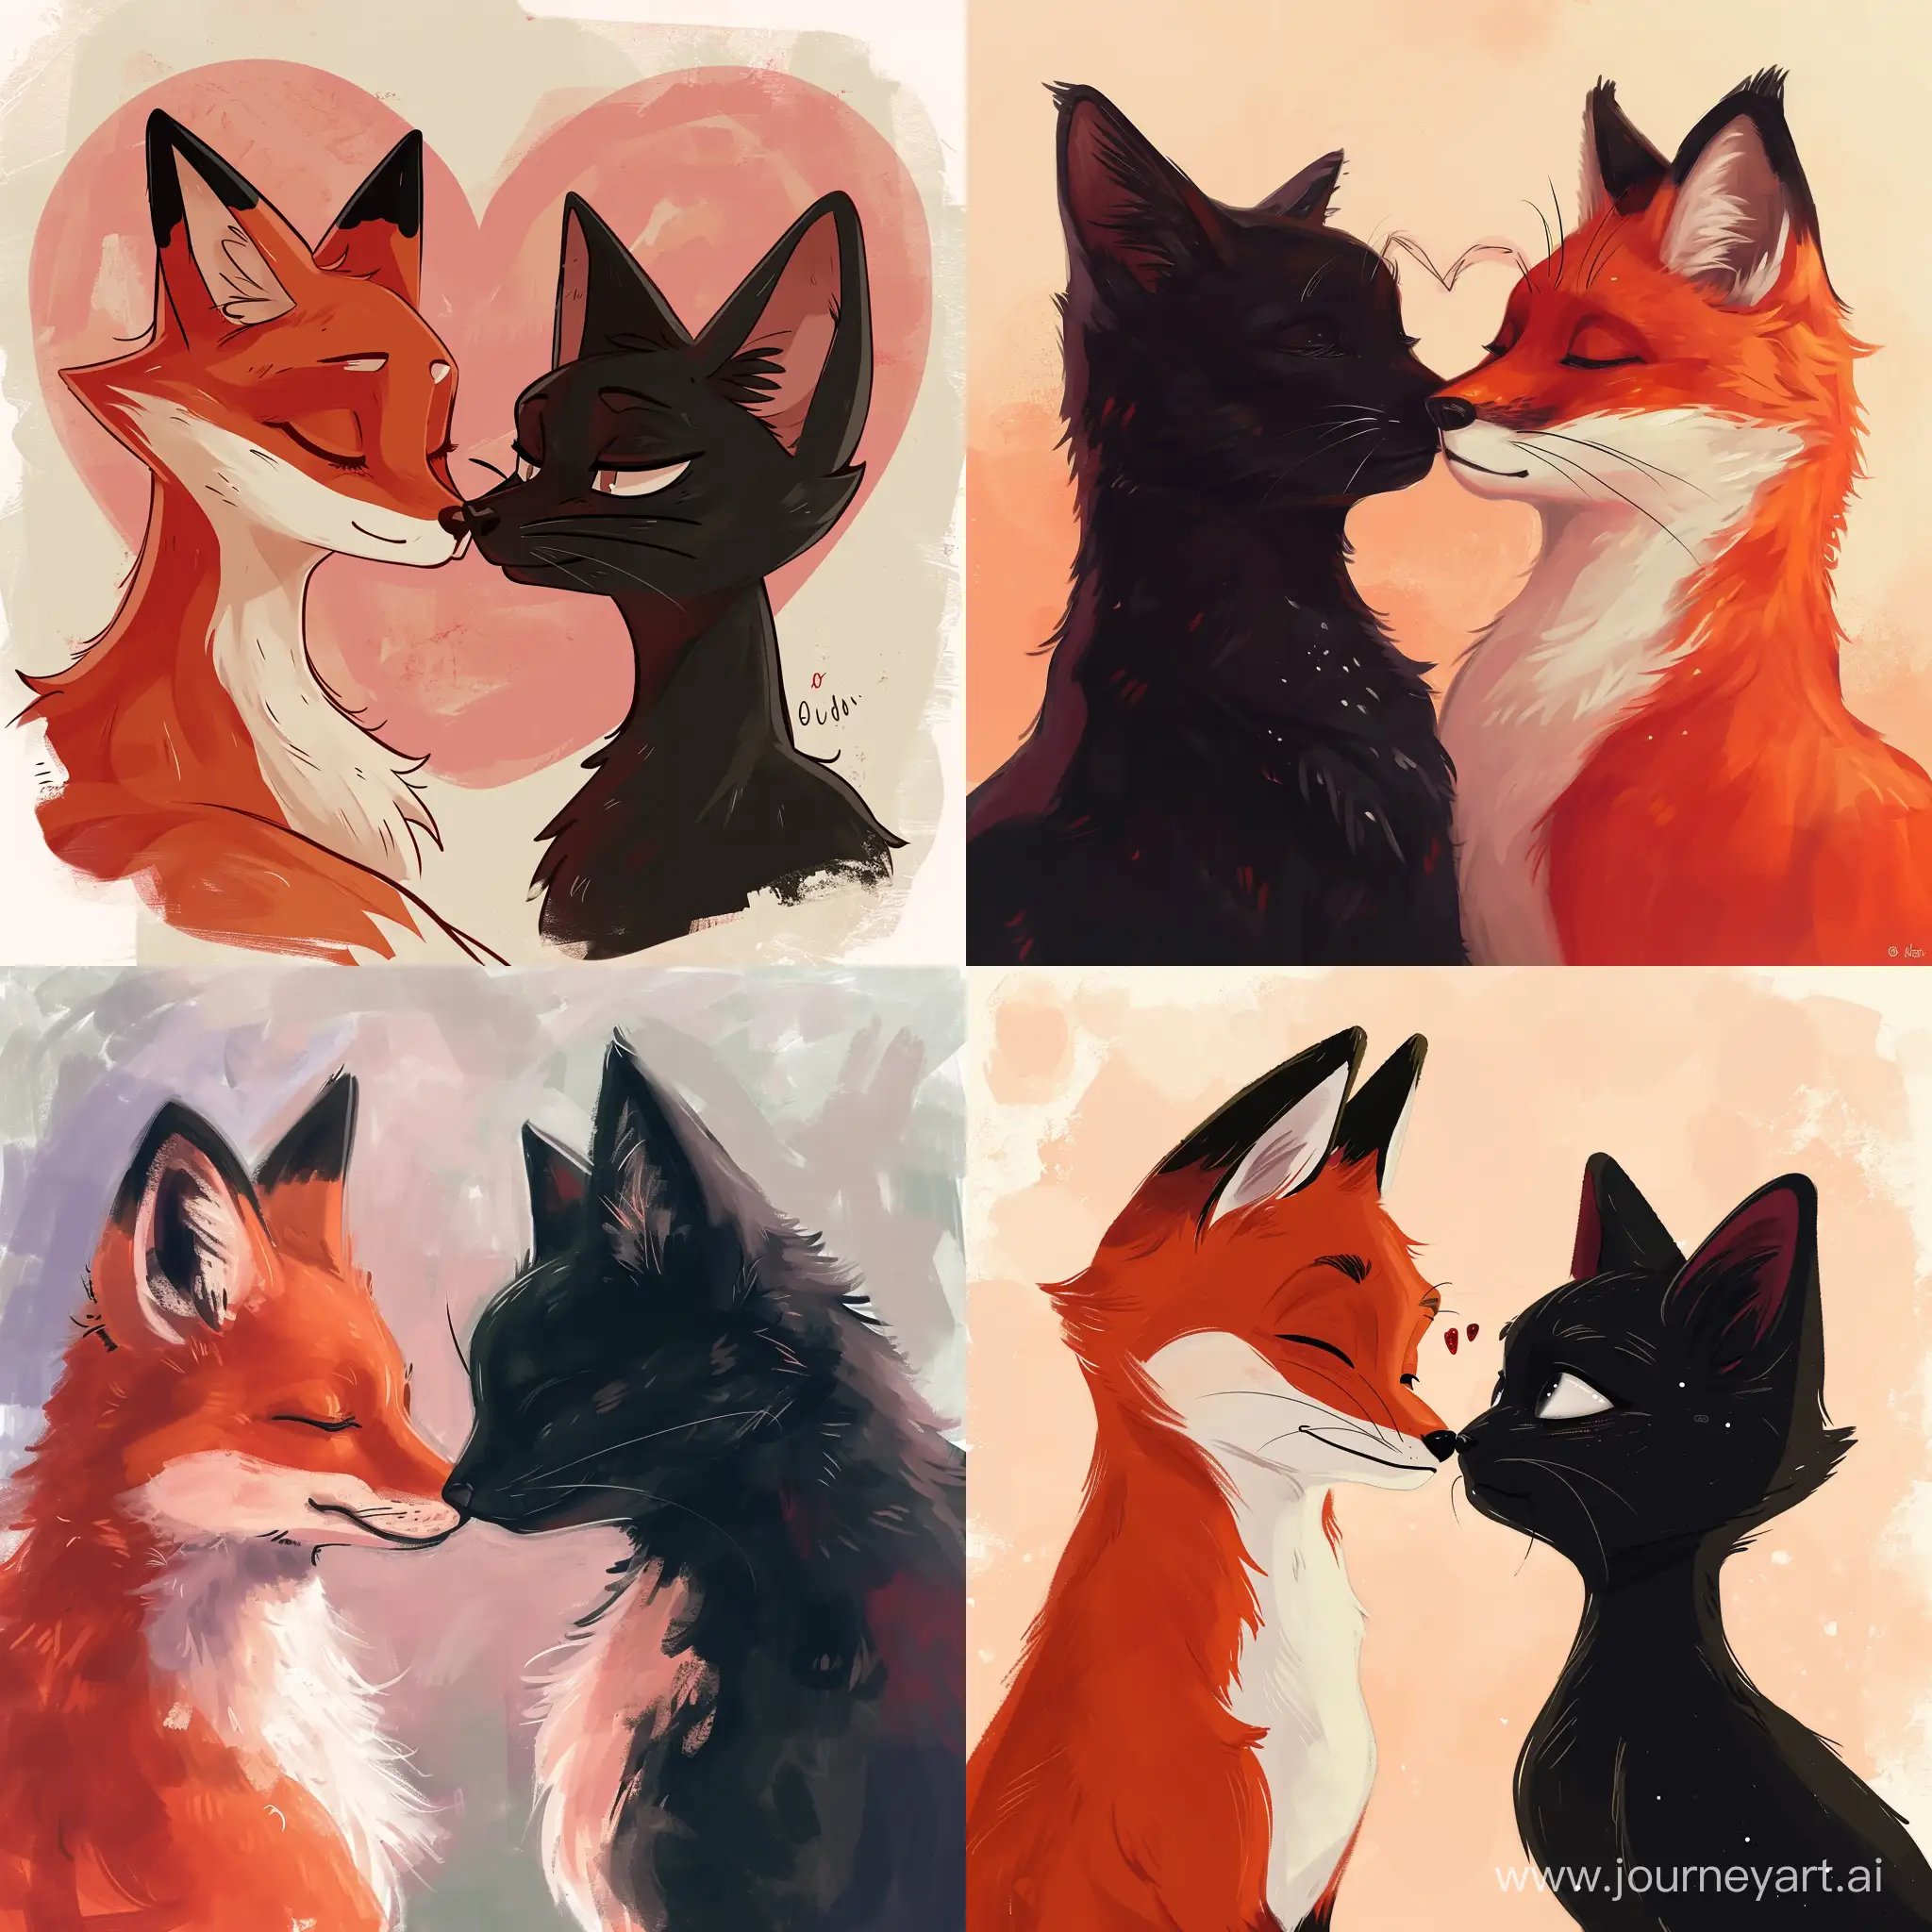 A red fox and a black cat in anime style joined foreheads in a heart